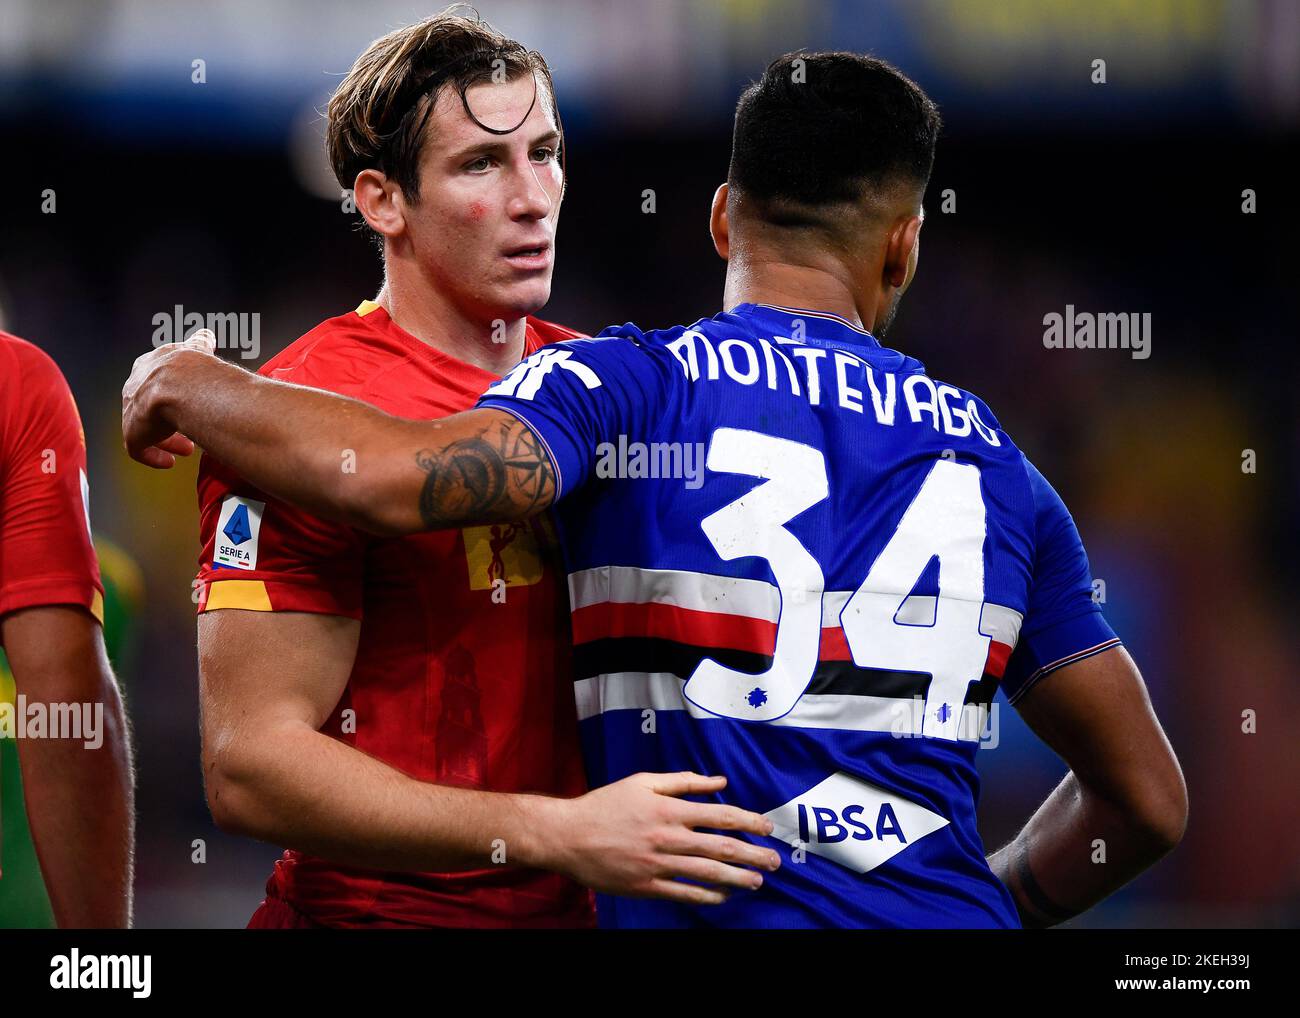 Genoa, Italy. 30 April 2022. Leo Ostigard of Genoa CFC in action during the  Serie A football match between UC Sampdoria and Genoa CFC. Credit: Nicolò  Campo/Alamy Live News Stock Photo - Alamy